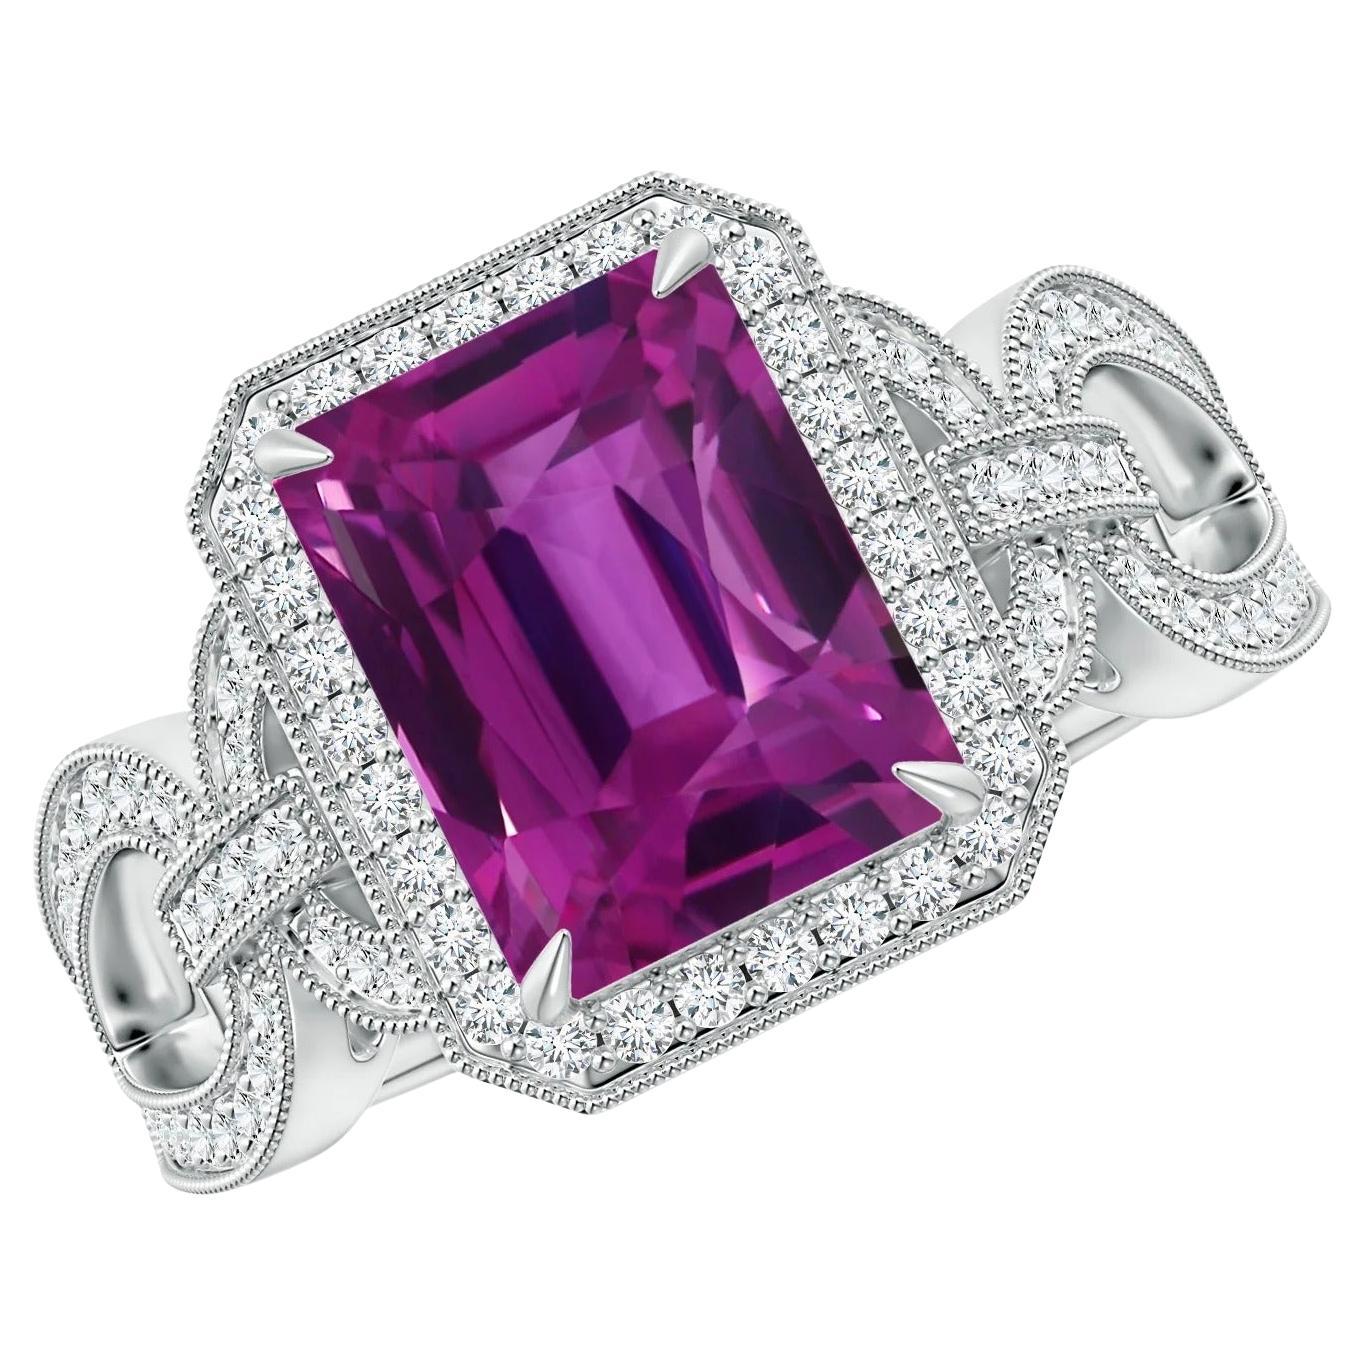 For Sale:  ANGARA GIA Certified Natural Pink Sapphire Ring in Platinum with Diamond Halo